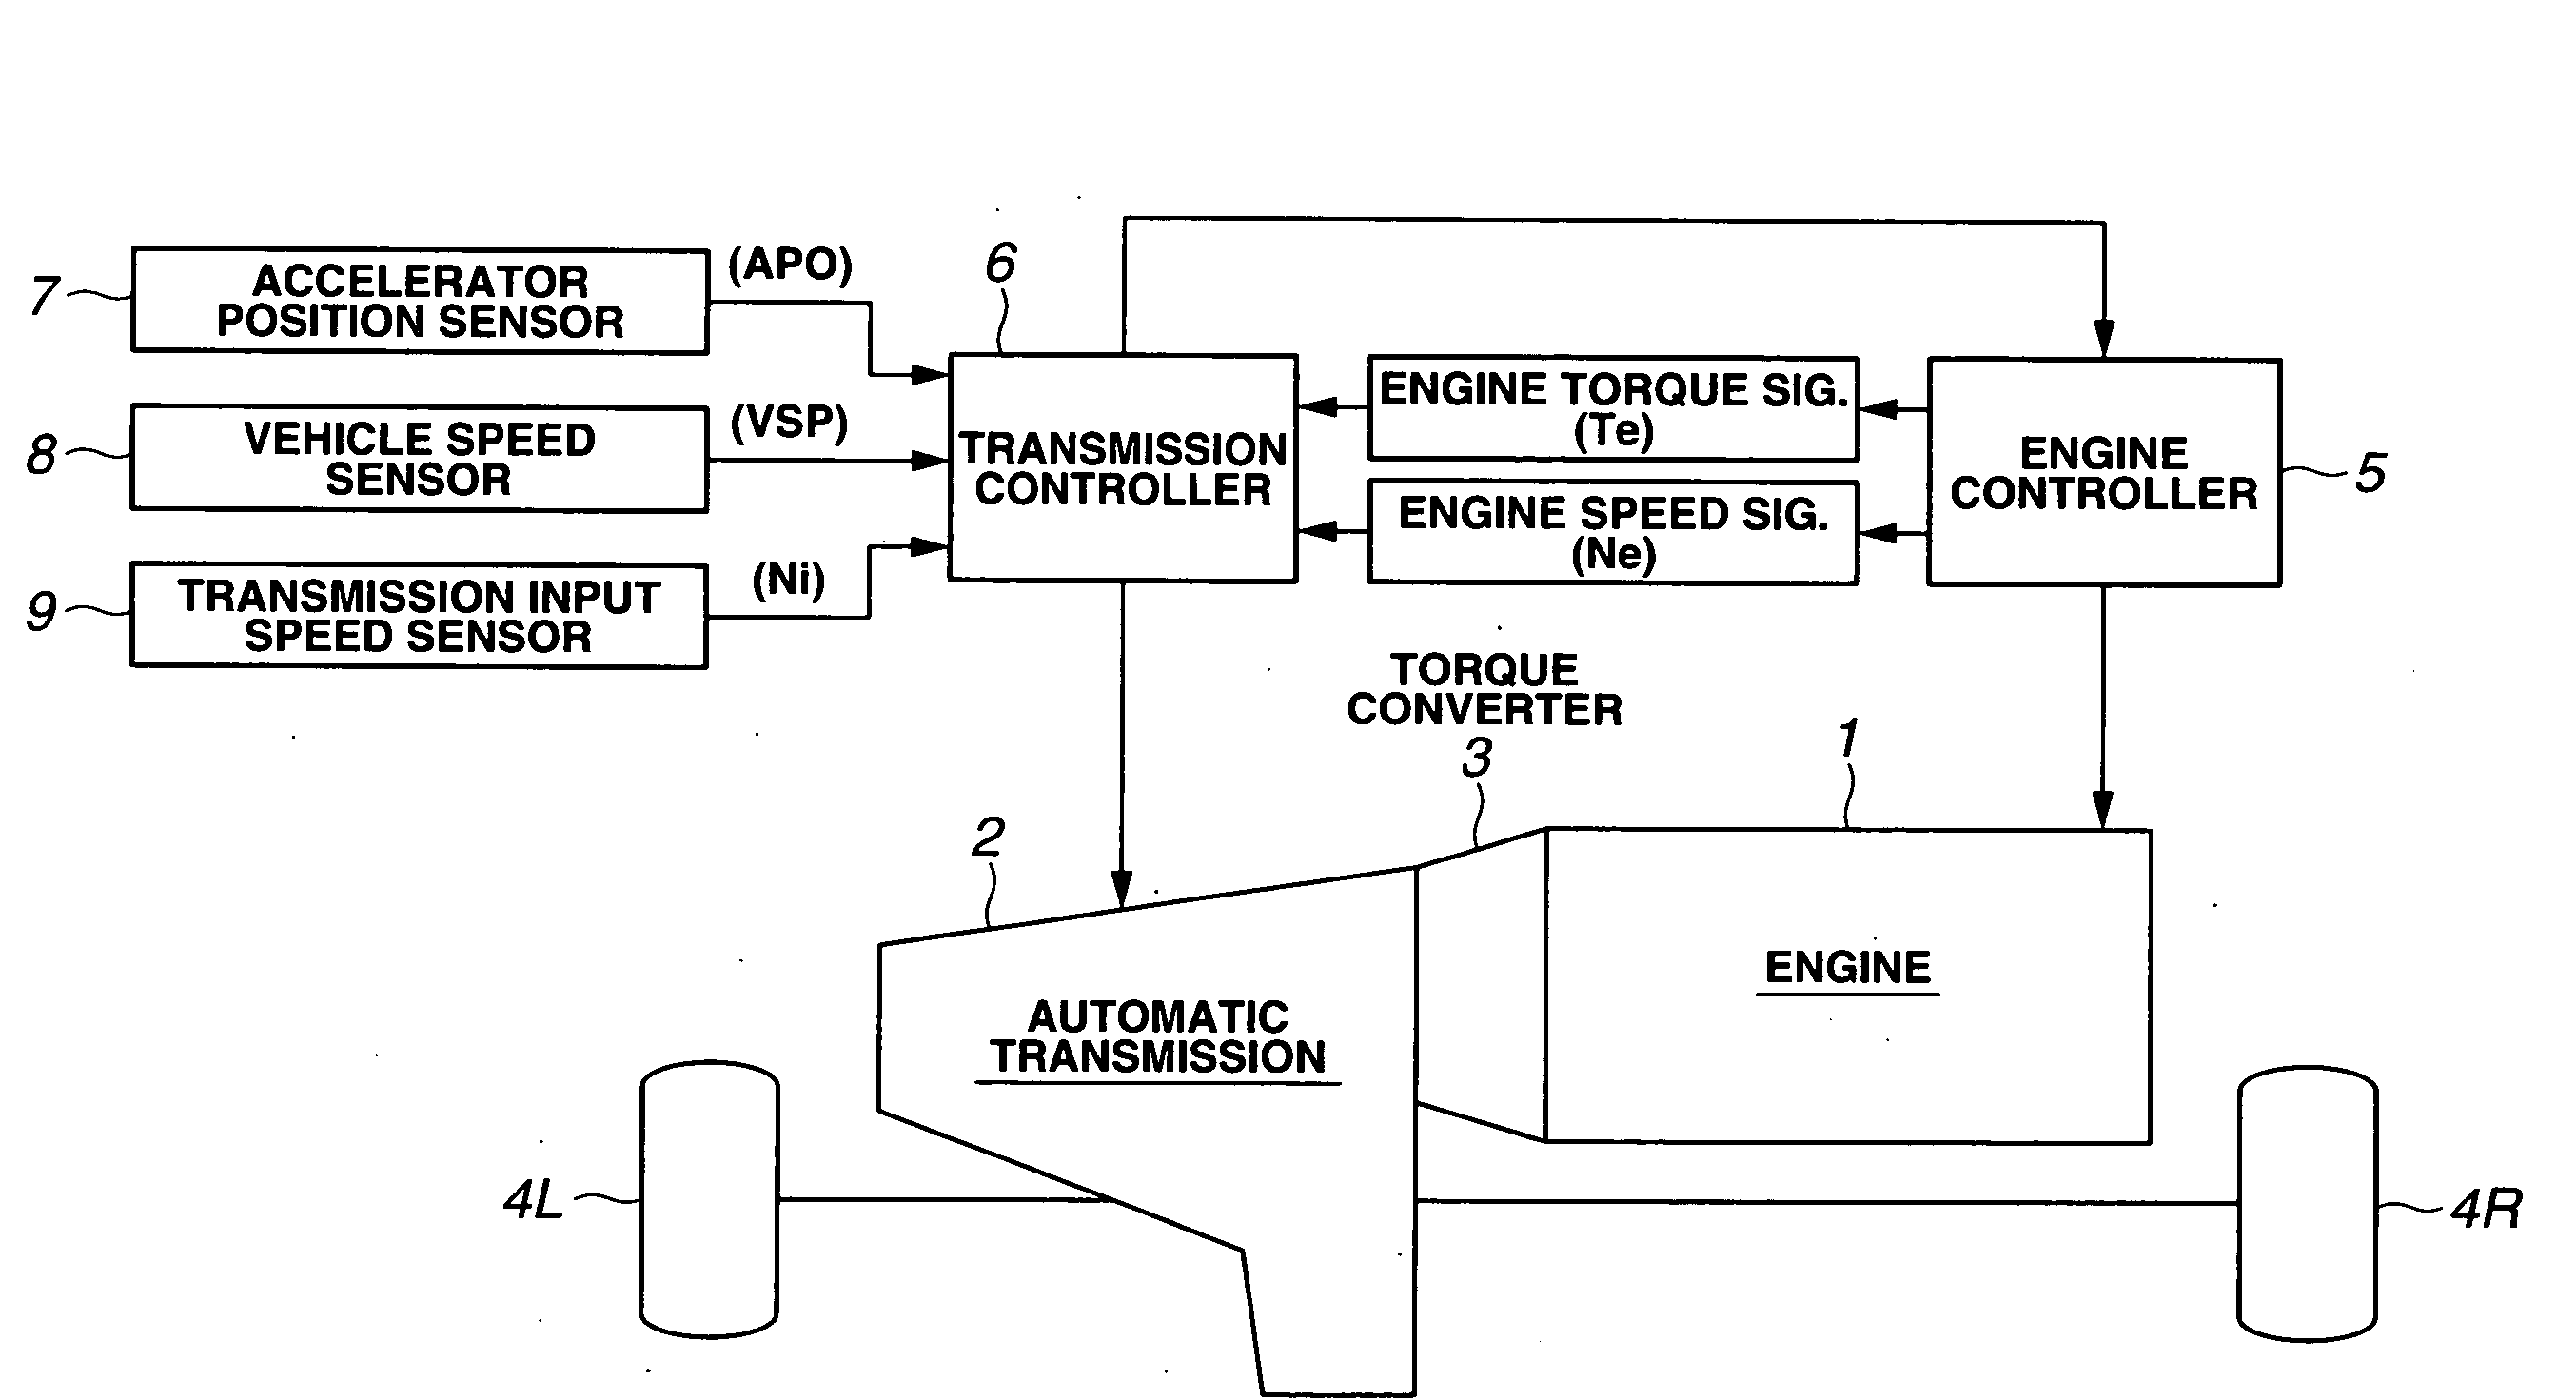 Engine output control apparatus of power train